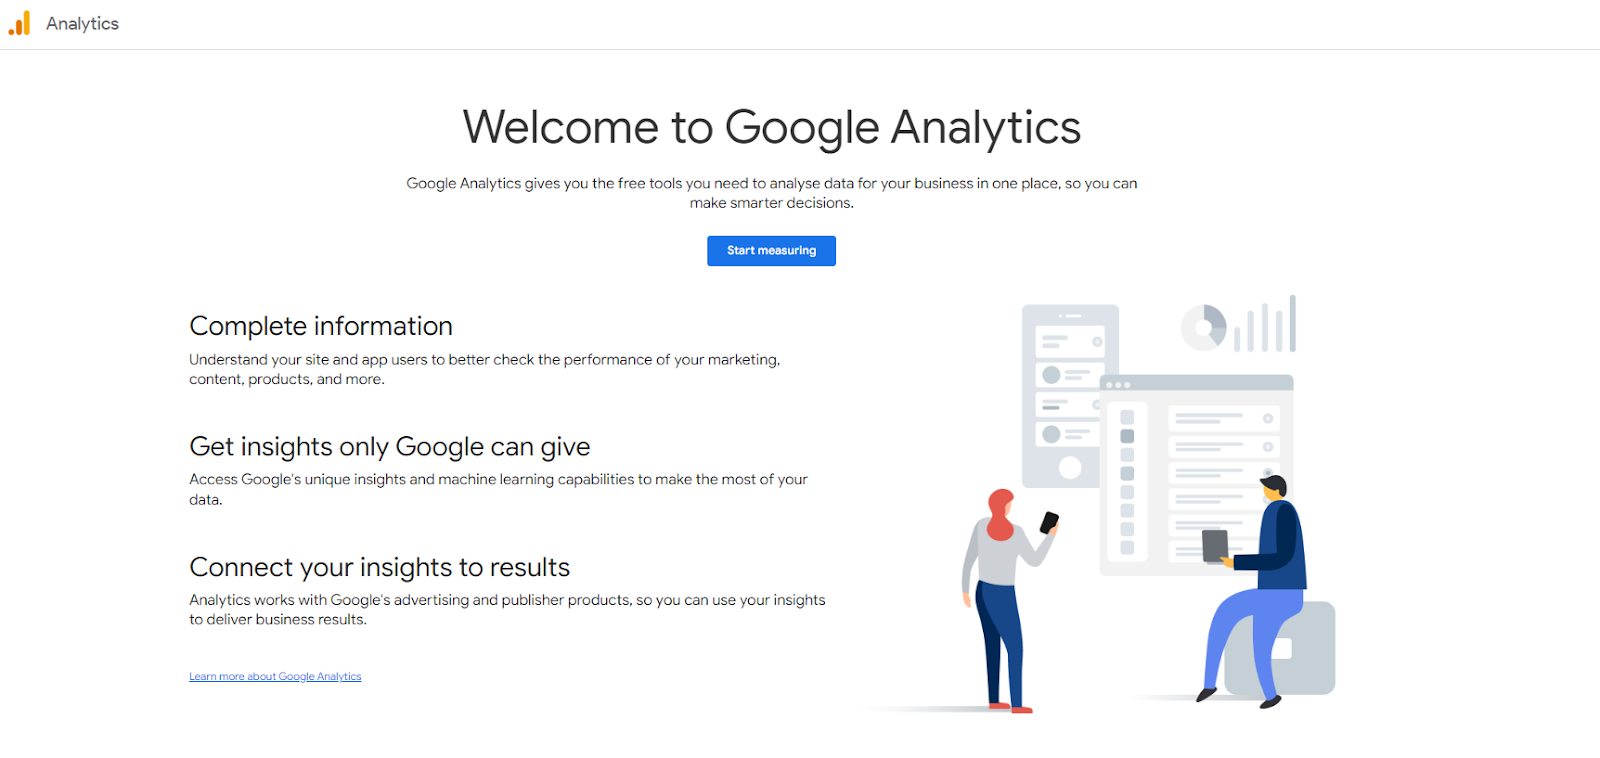 Google Analytics can help you find what works & what’s not on your site. 